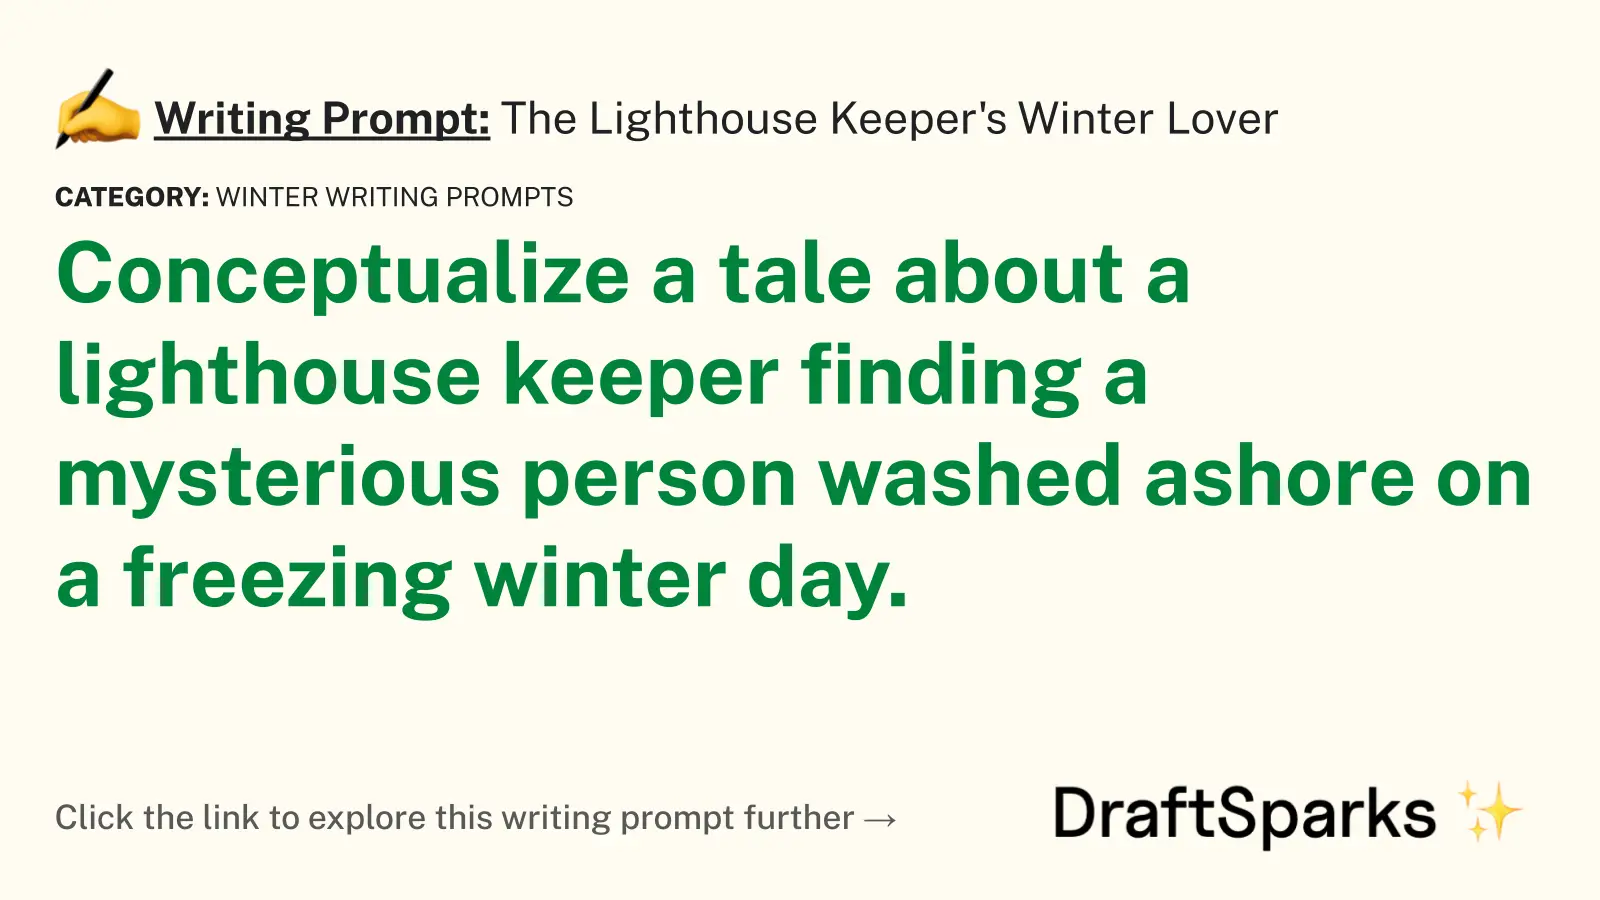 The Lighthouse Keeper’s Winter Lover